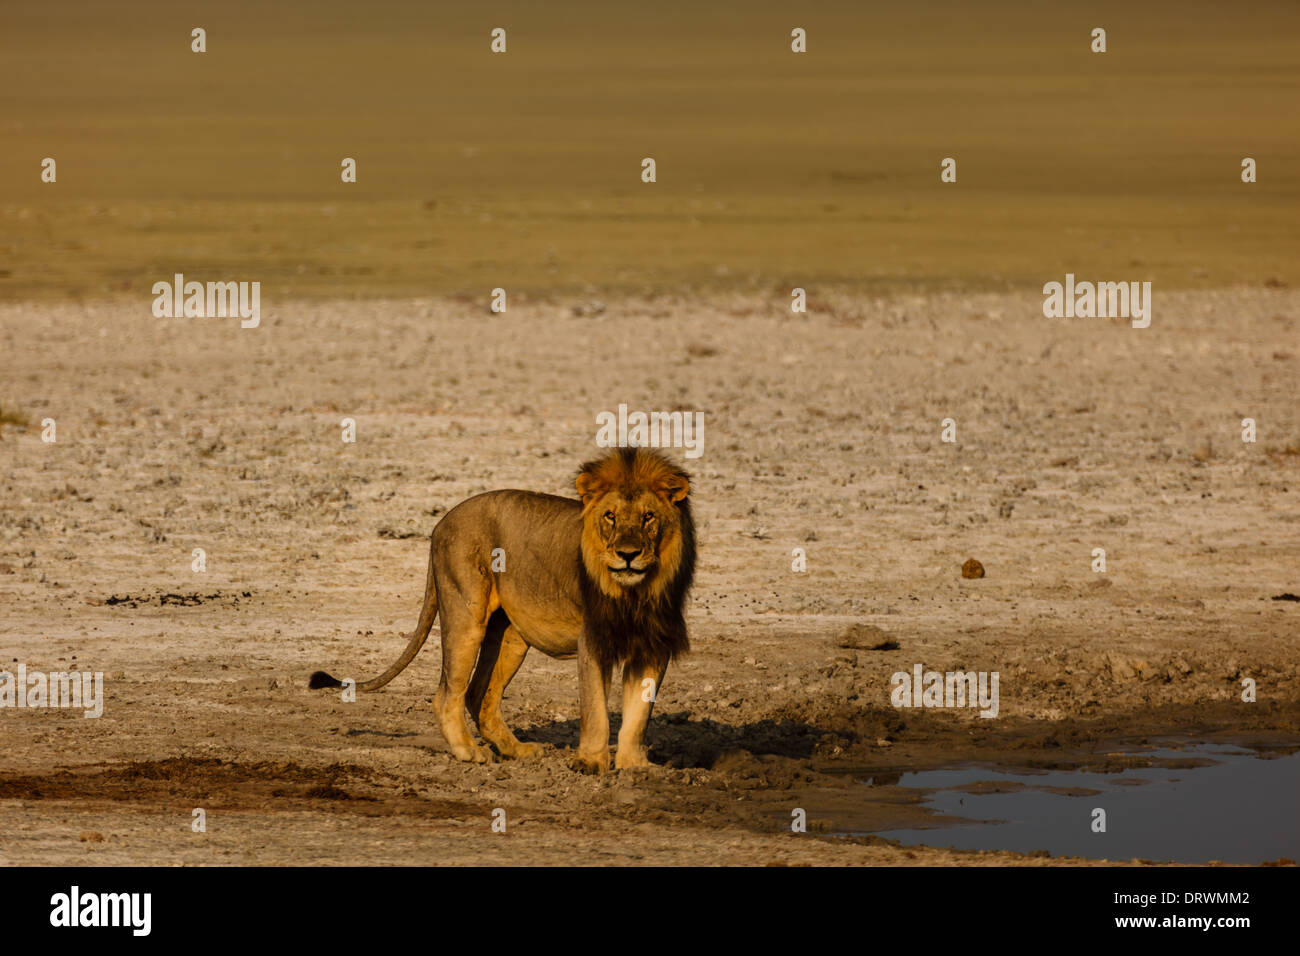 Male lion stands next to watering hole alert to actions of photographer taking picture Stock Photo